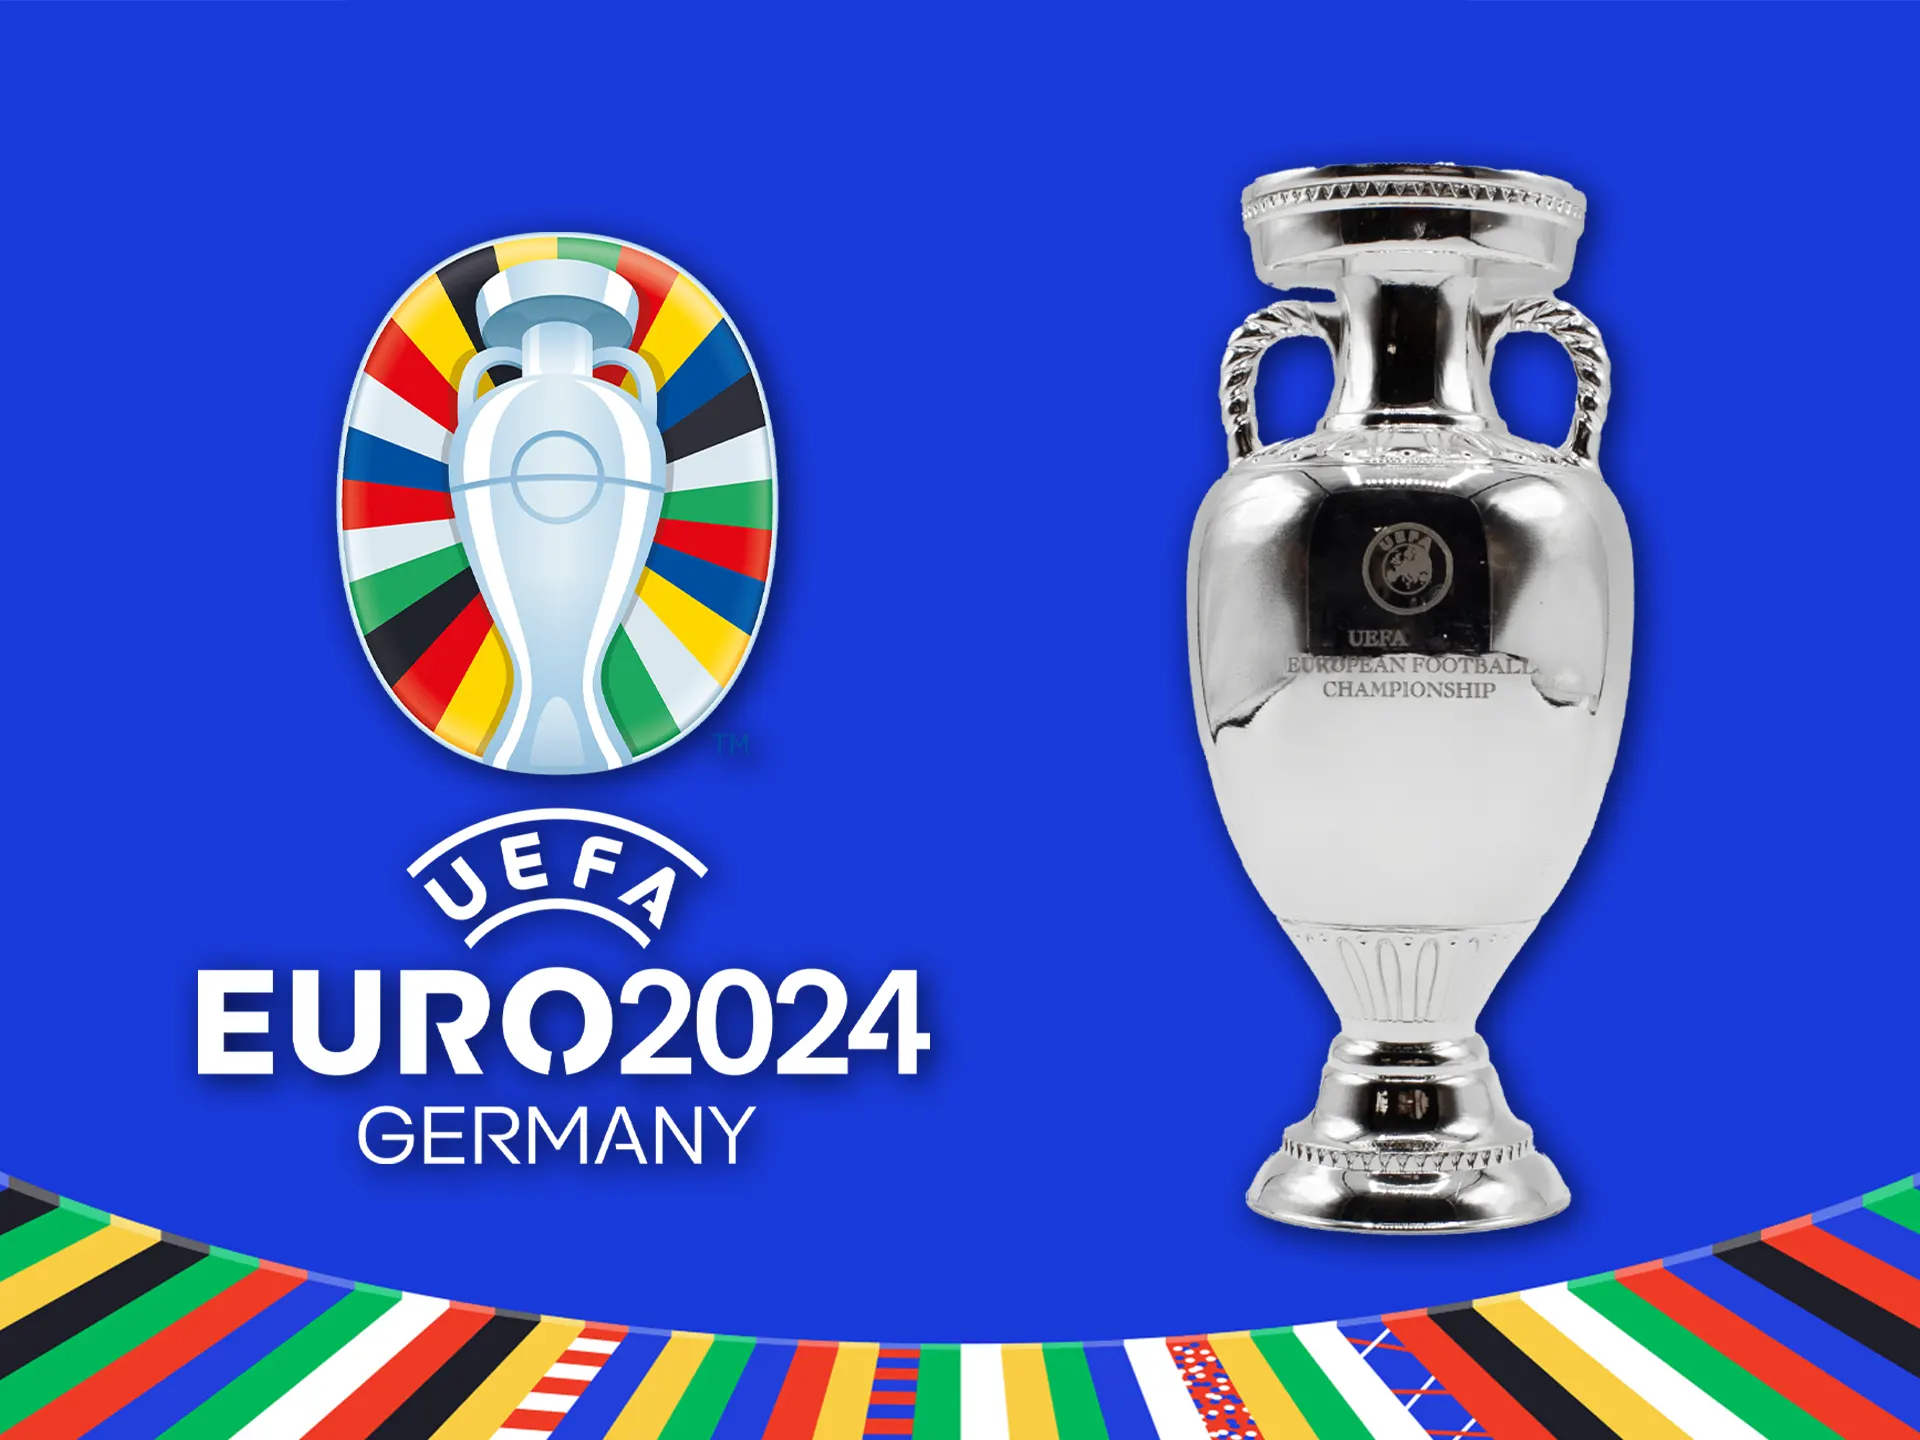 Euro 2024 is a landmark event for football fans and bettors.